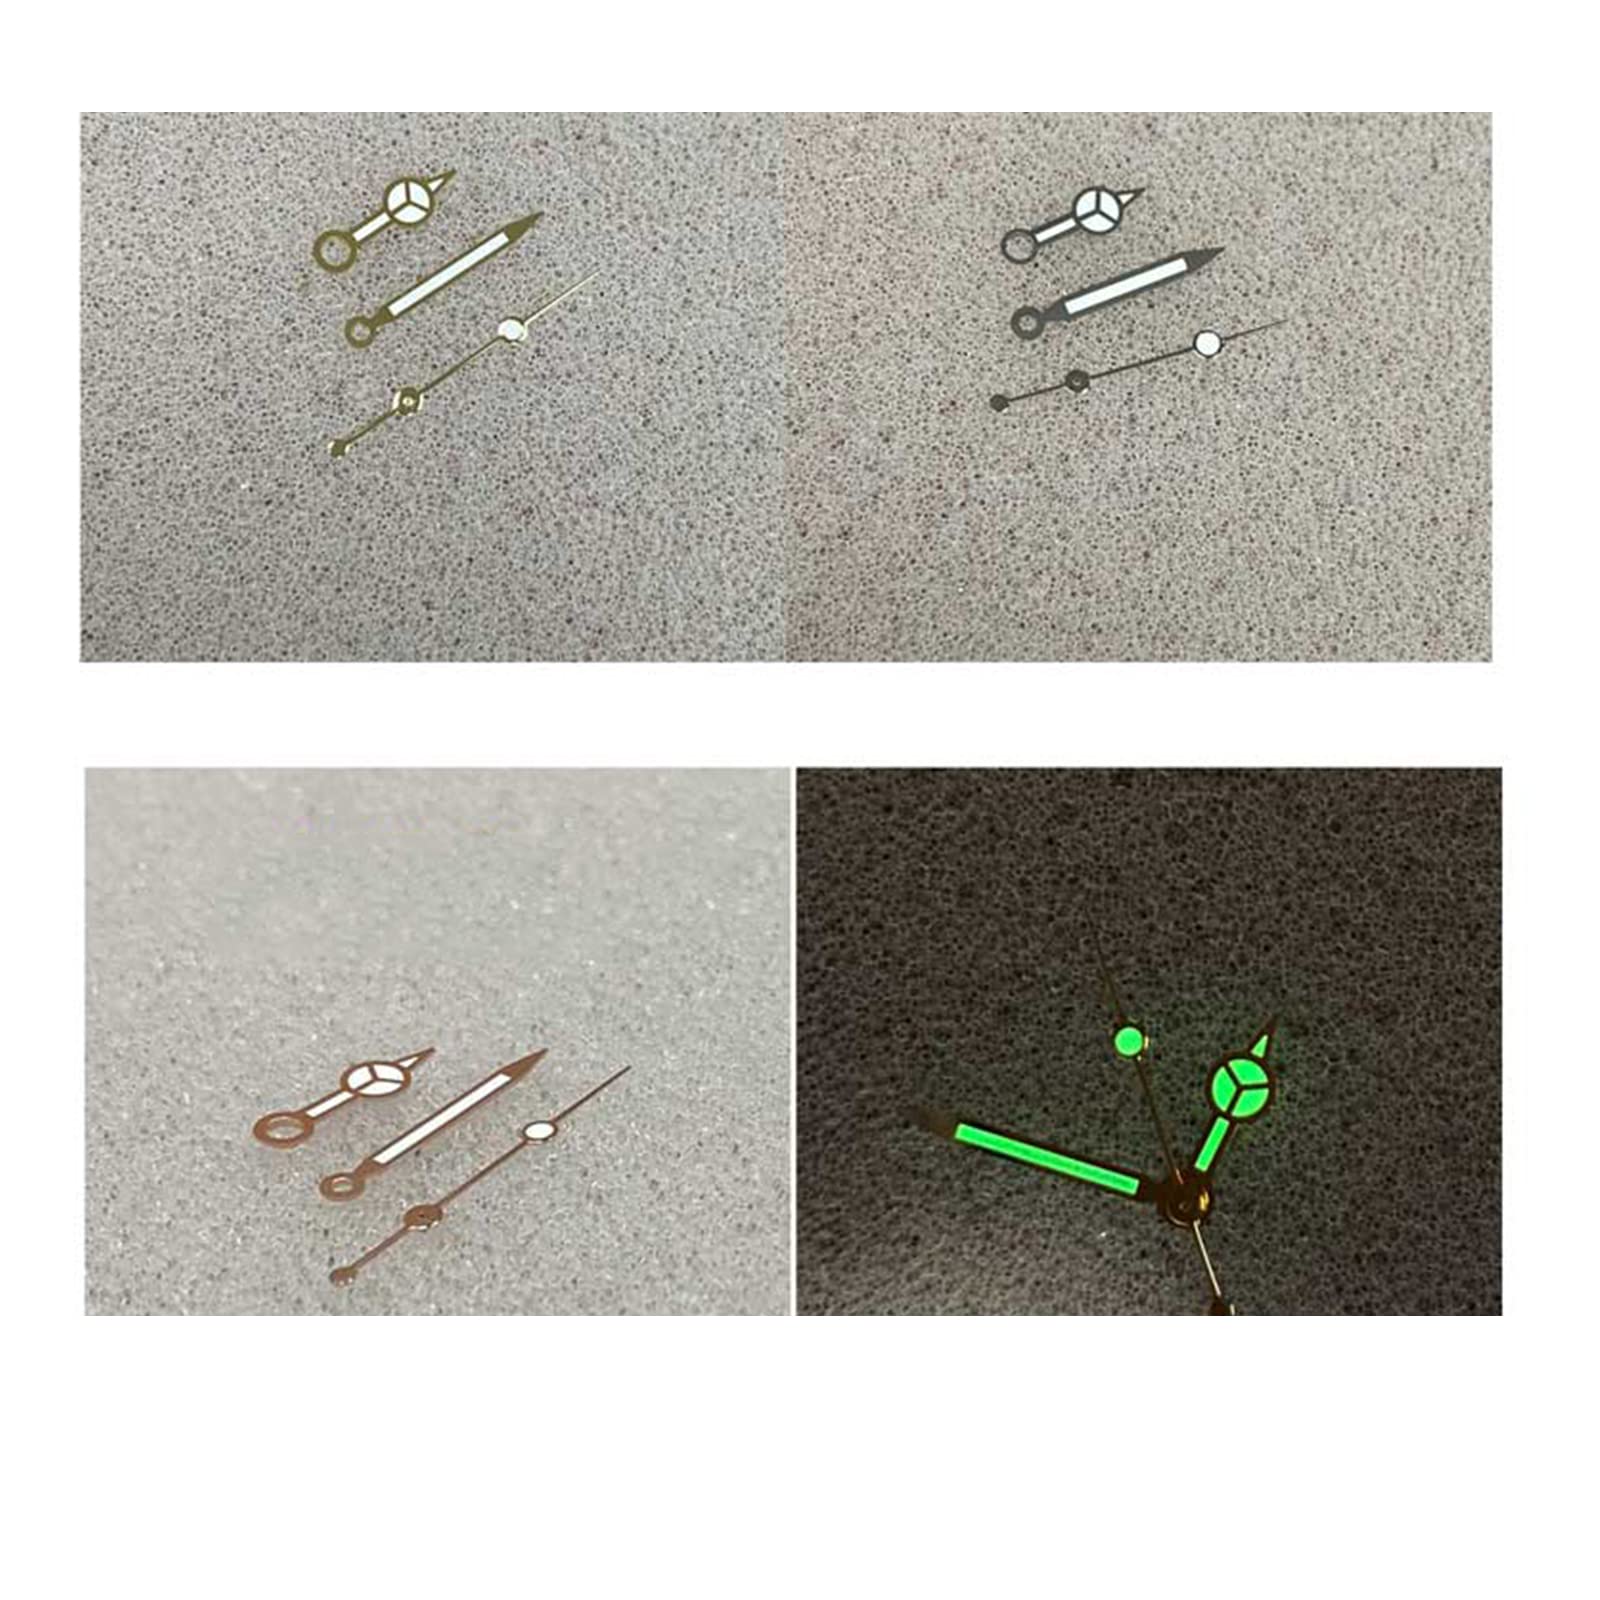 LICHIFIT Green Luminous Watch Hands Replacement Watch Pointer 3 Pins Repair Parts for NH35/NH36 Watch Movement Modification Kits